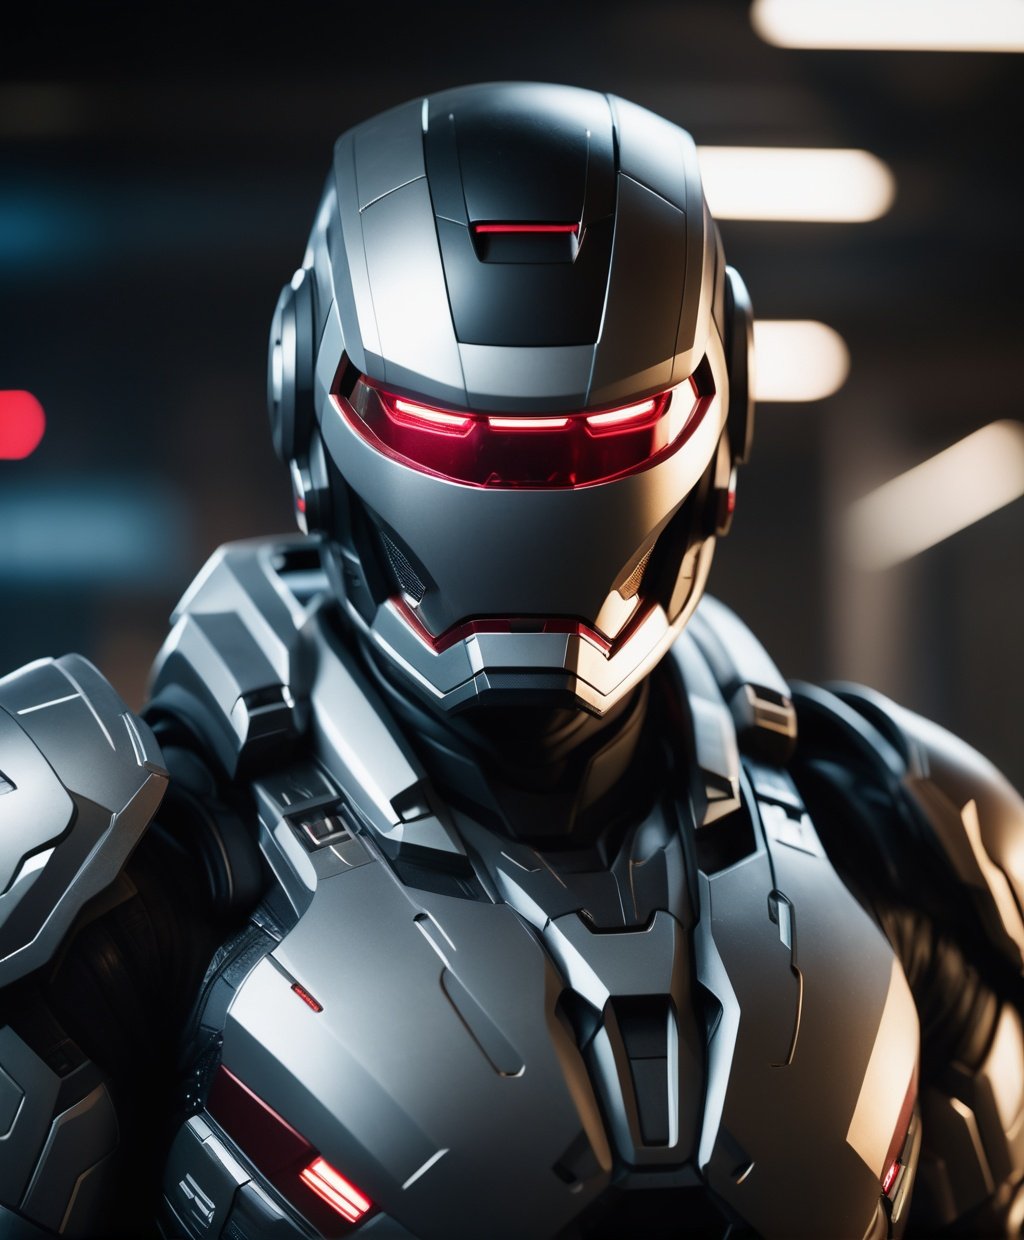 cinematic film still (Raw Photo:1.3) of (Ultrarealistic:1.3),(Angry:1.3) cyborg style, ([ironman]:.8), science fiction, visor, helmet, mecha armor, standing, scifi, high quality, high resolution, dslr, 8k, 4k, ultrarealistic, realistic,(SEMI-SILHOUETTE light:1.1), (raytracing:1.1), (cryengine:1.1),Highly Detailed,(Fujifilm Superia:1.3),(close portrait:1.3),thematic background . shallow depth of field, vignette, highly detailed, high budget, bokeh, cinemascope, moody, epic, gorgeous, film grain, grainy